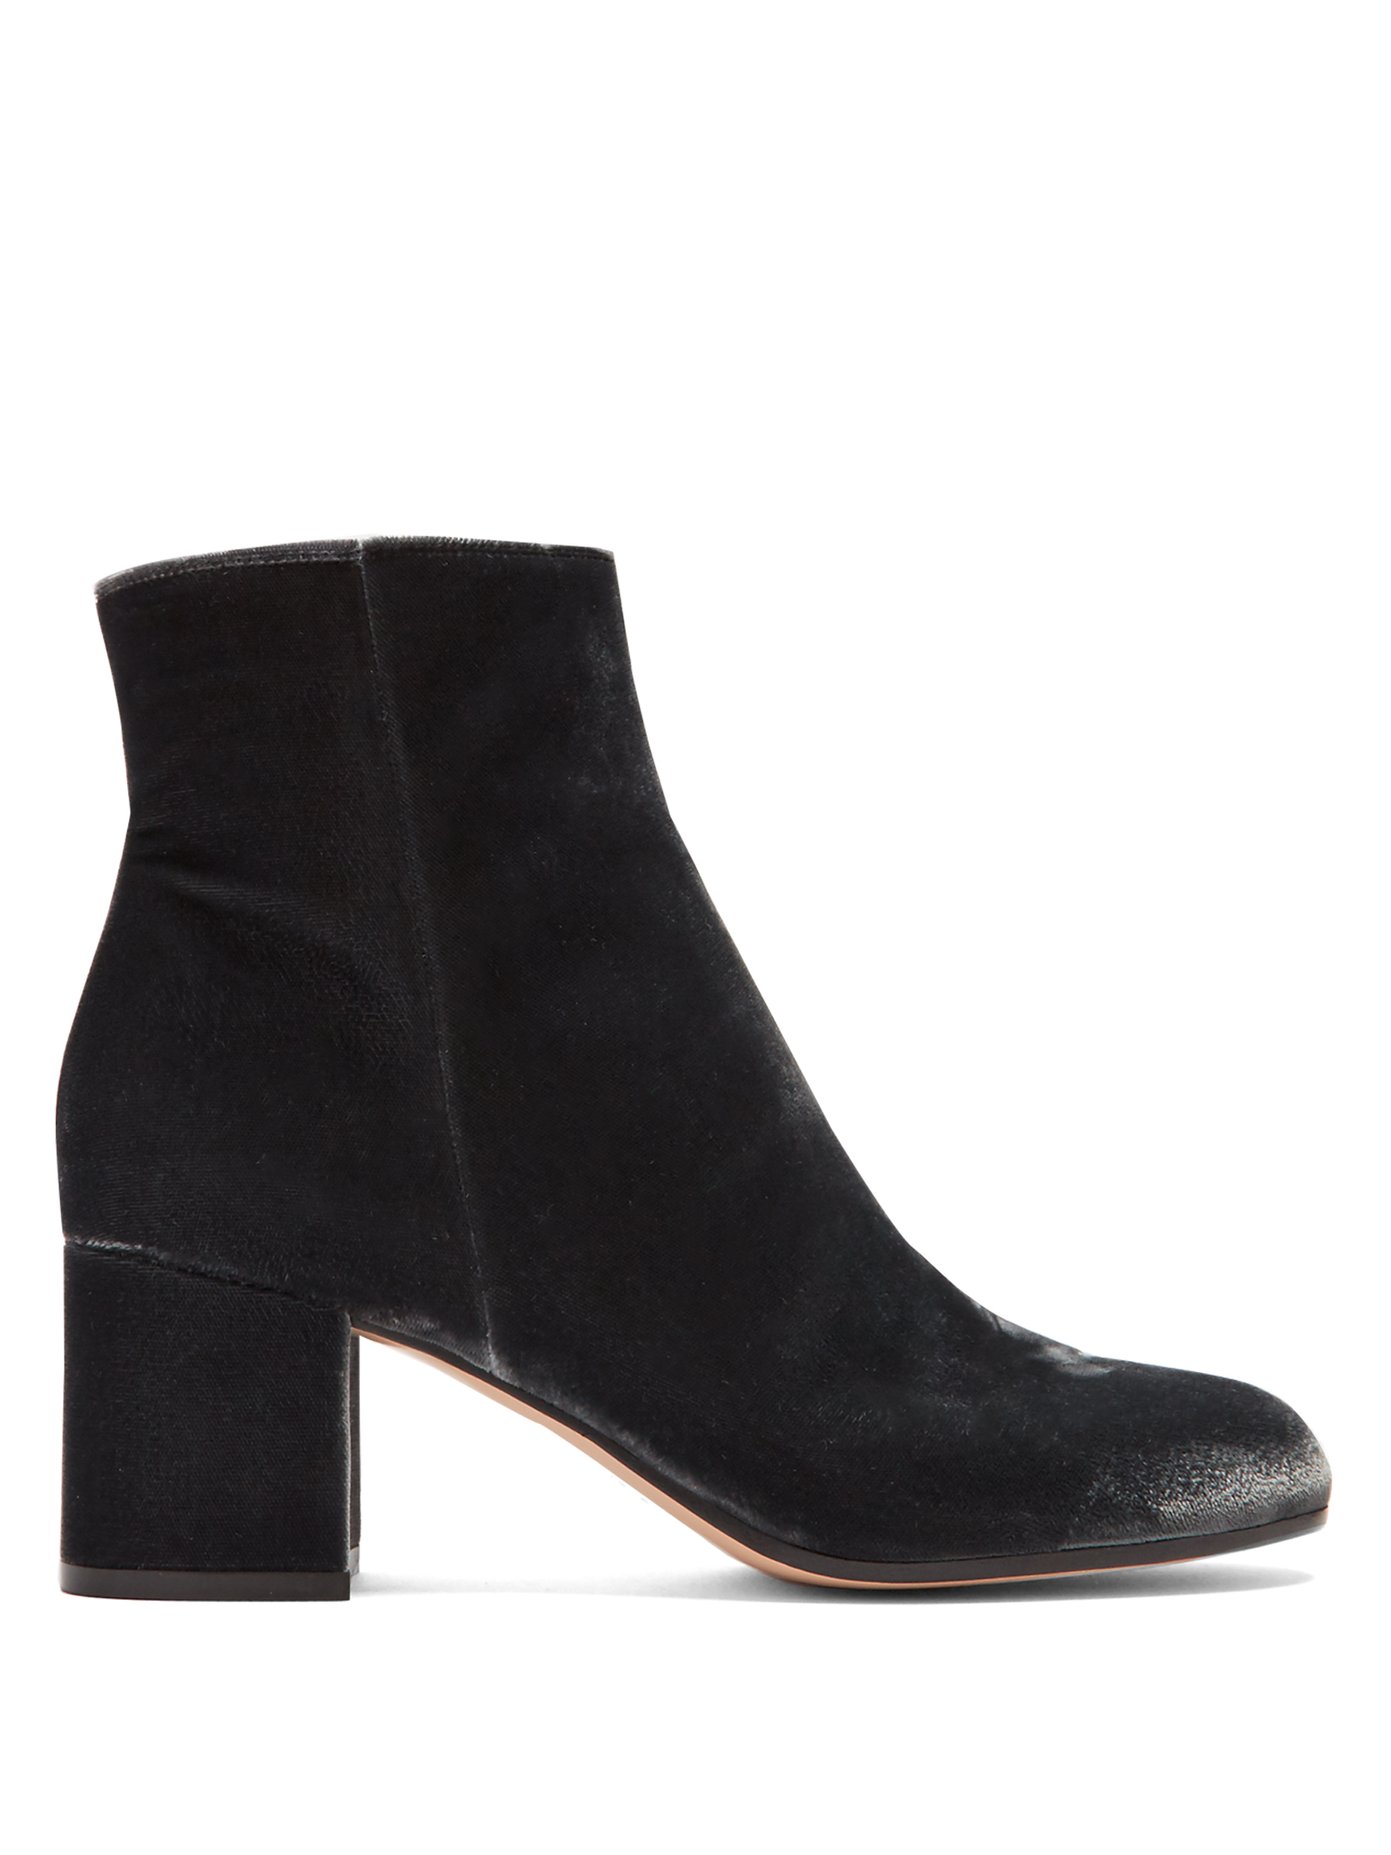 gianvito rossi margaux ankle boots